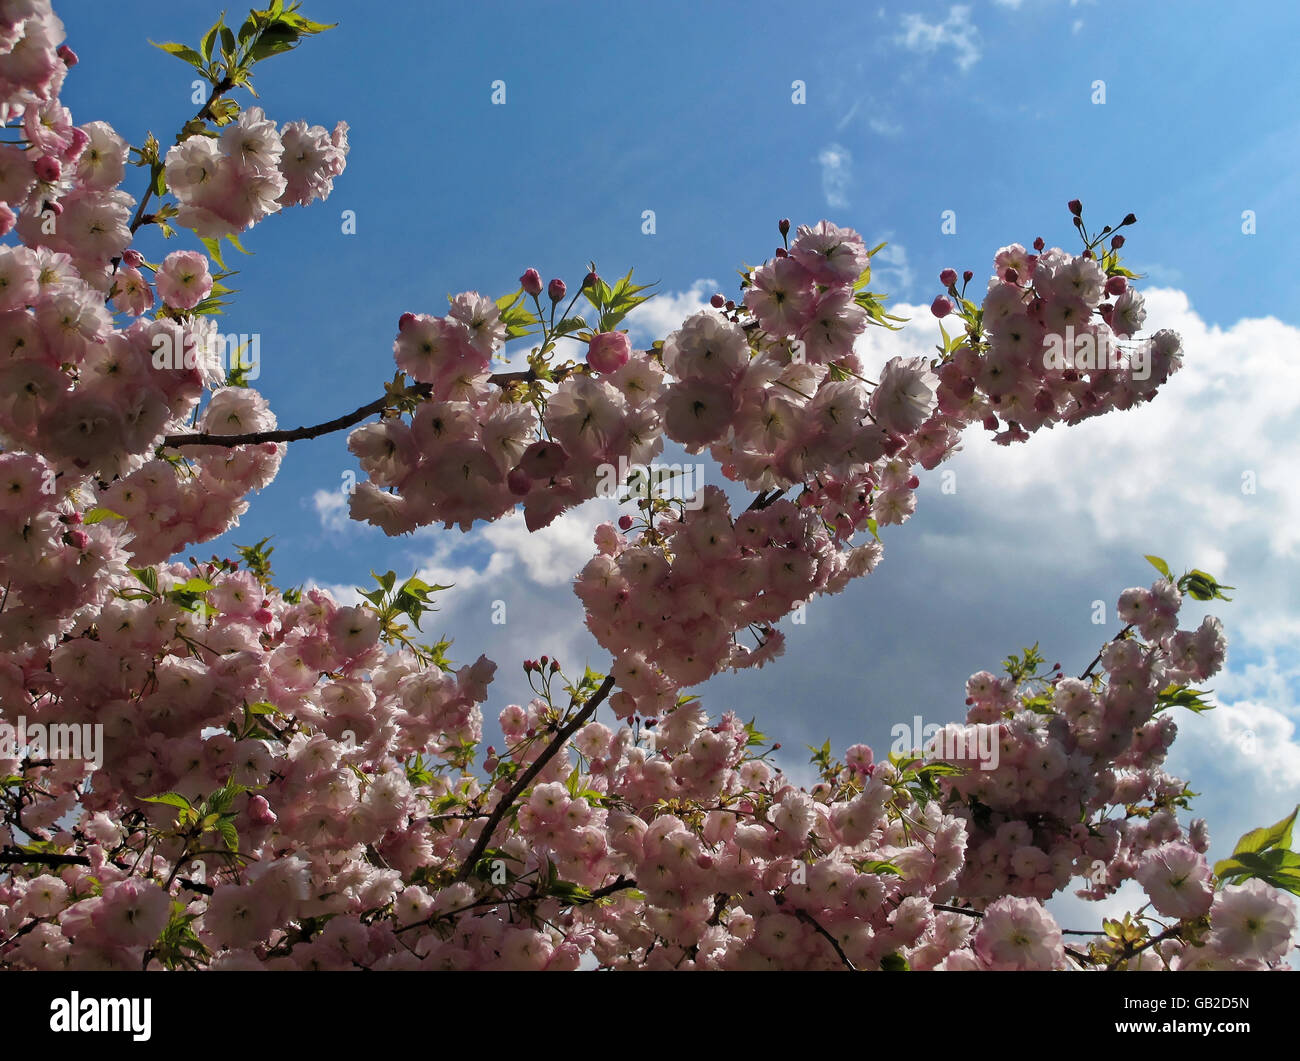 Sunlit light pink cherry blossoms against clouds and blue sky. Stock Photo